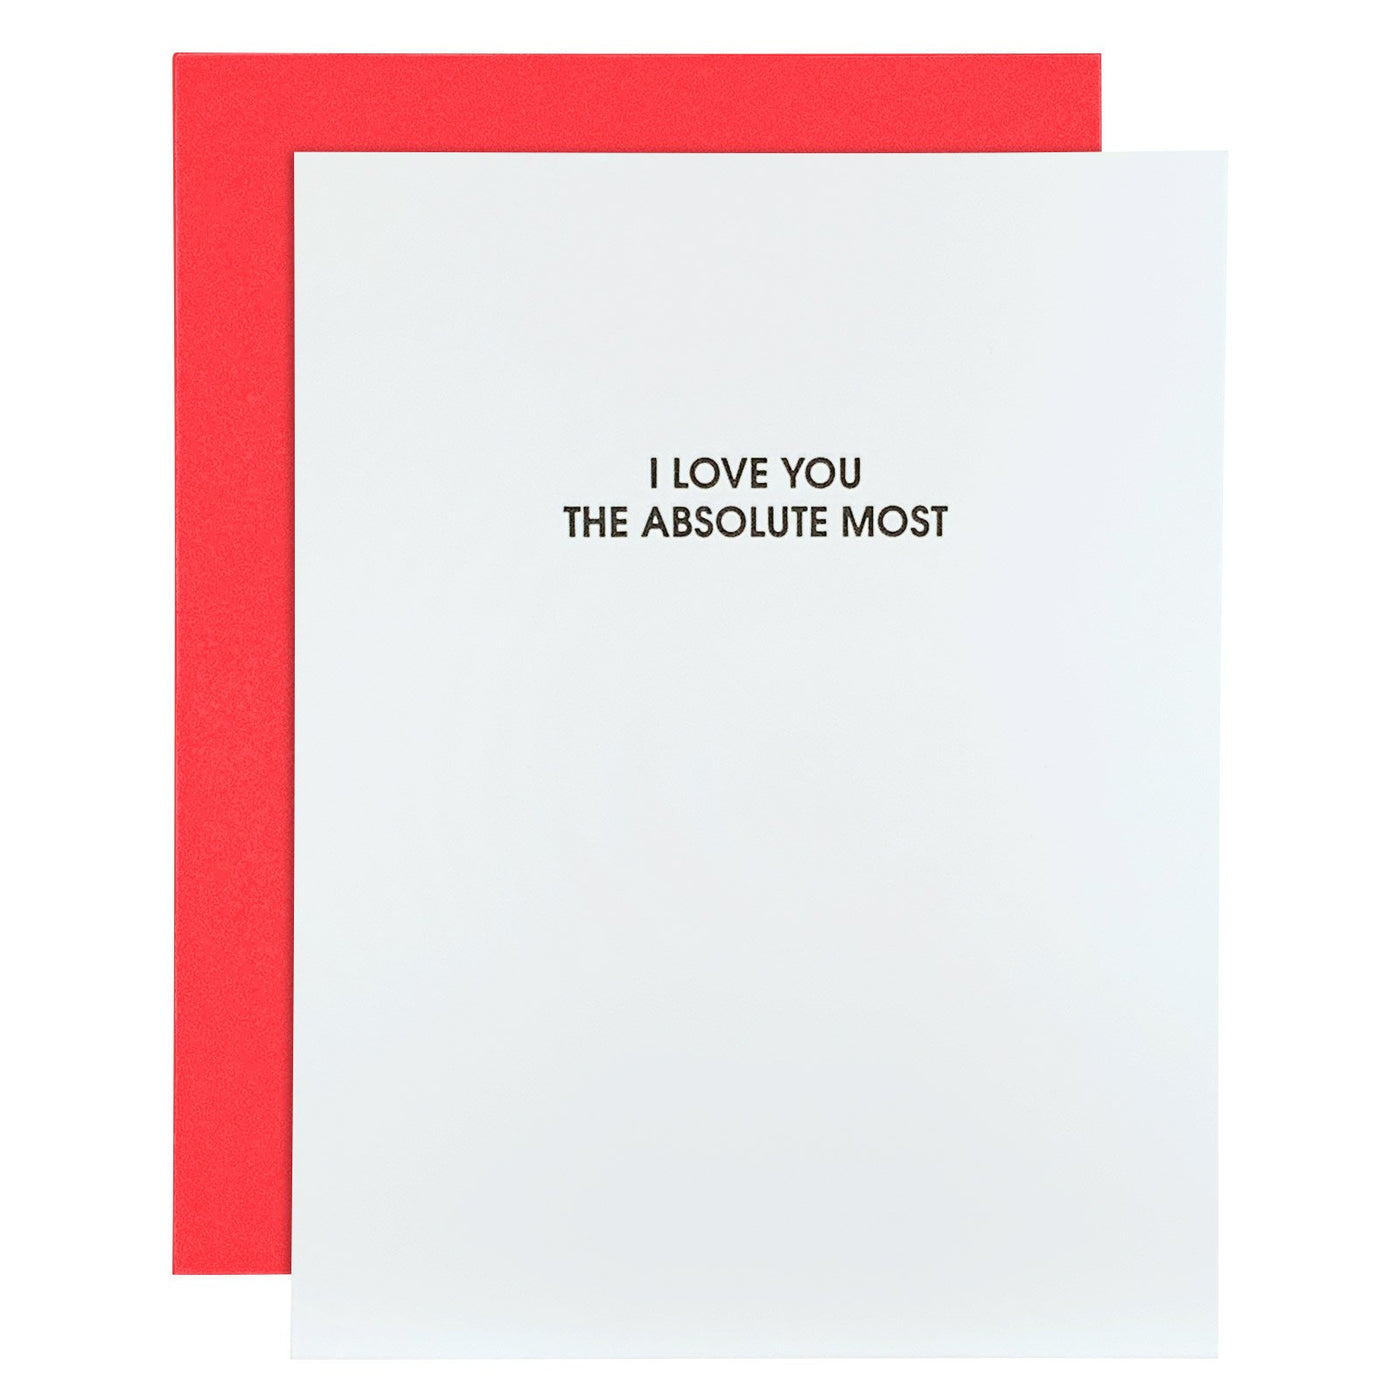 GREETING CARD "I LOVE YOU THE ABSOLUTE MOST"